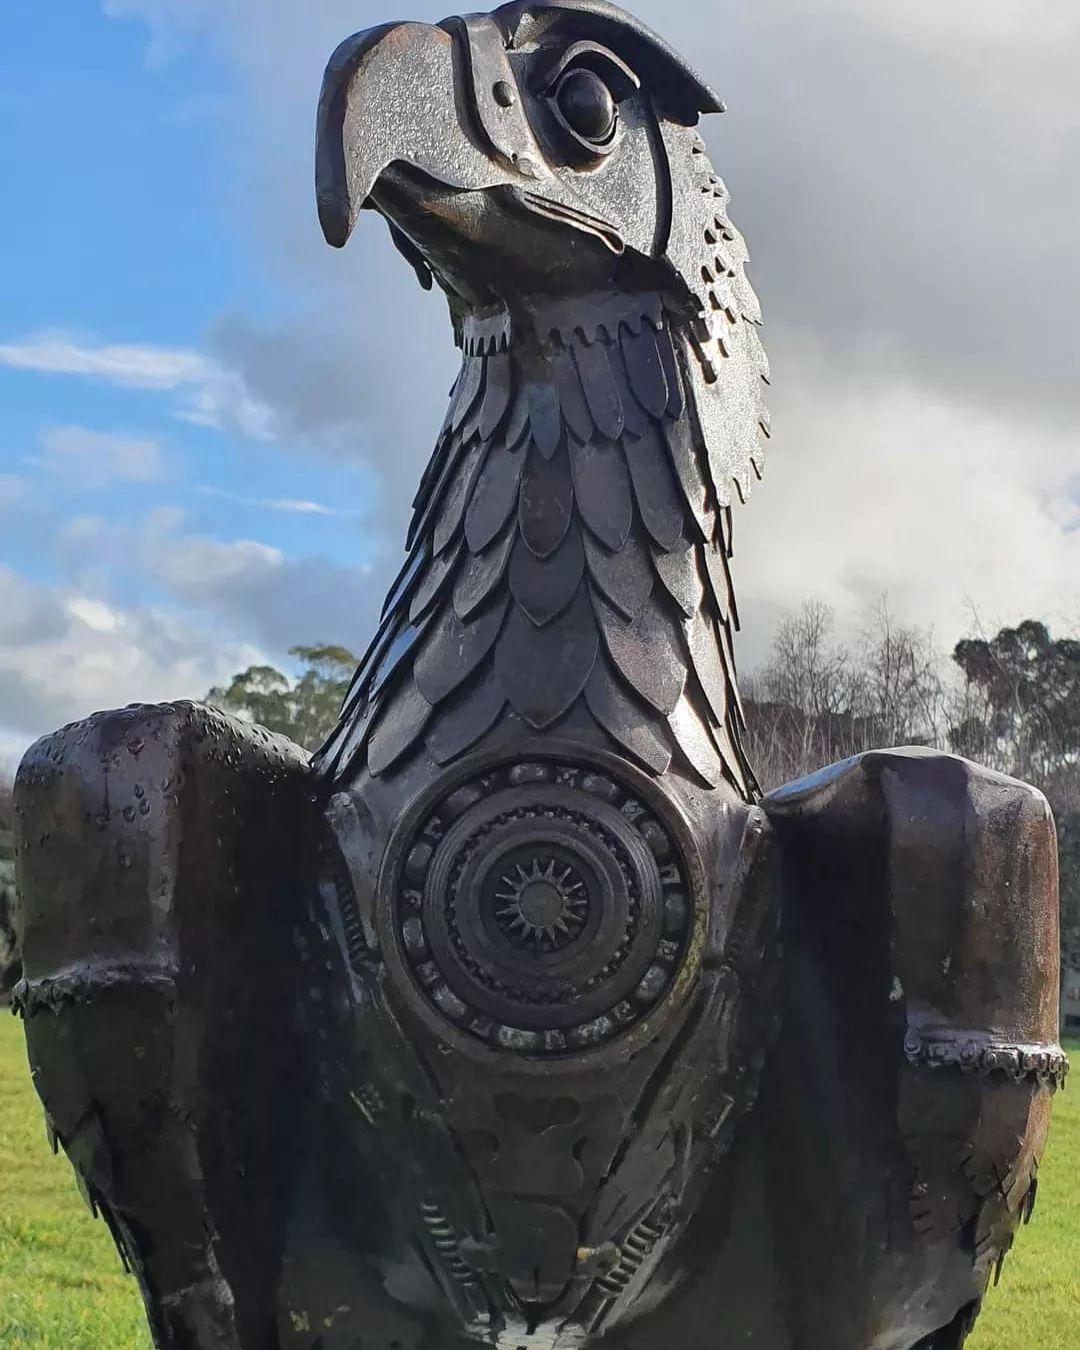 A close-up view of a life-size eagle. (Courtesy of <a href="https://www.instagram.com/sloanesculpture/">Matt Sloane</a>)